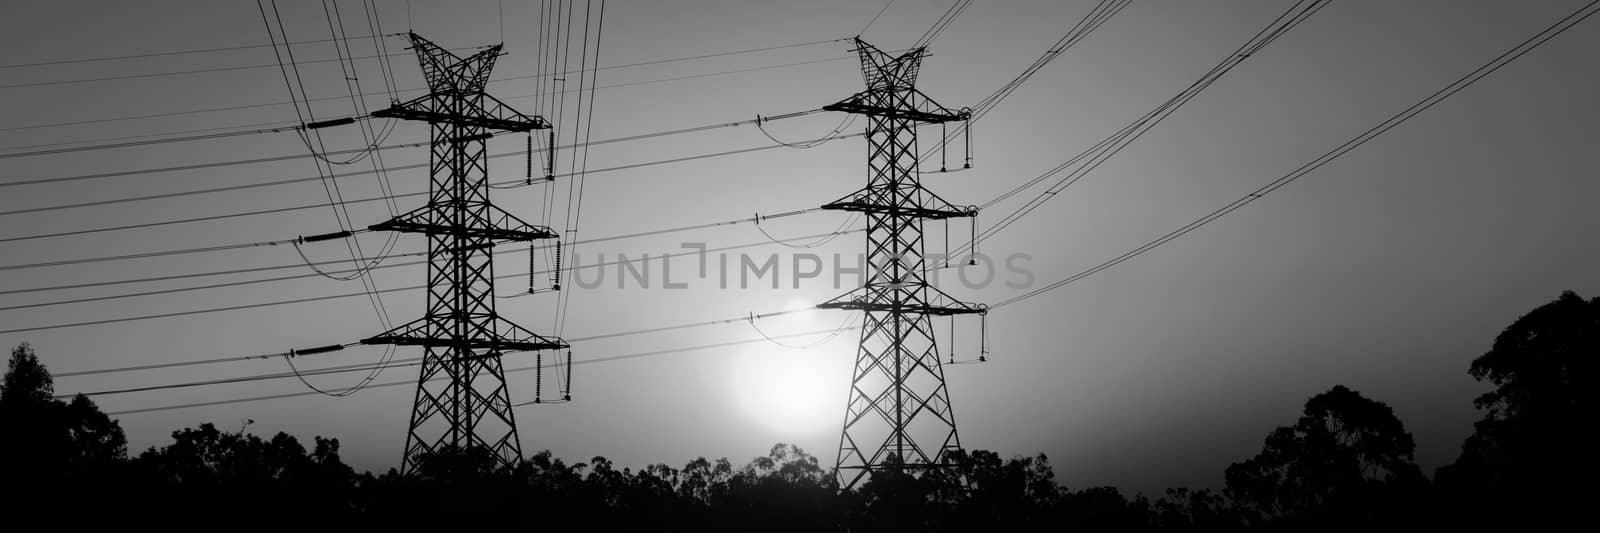 High voltage power tower at sunset by artistrobd